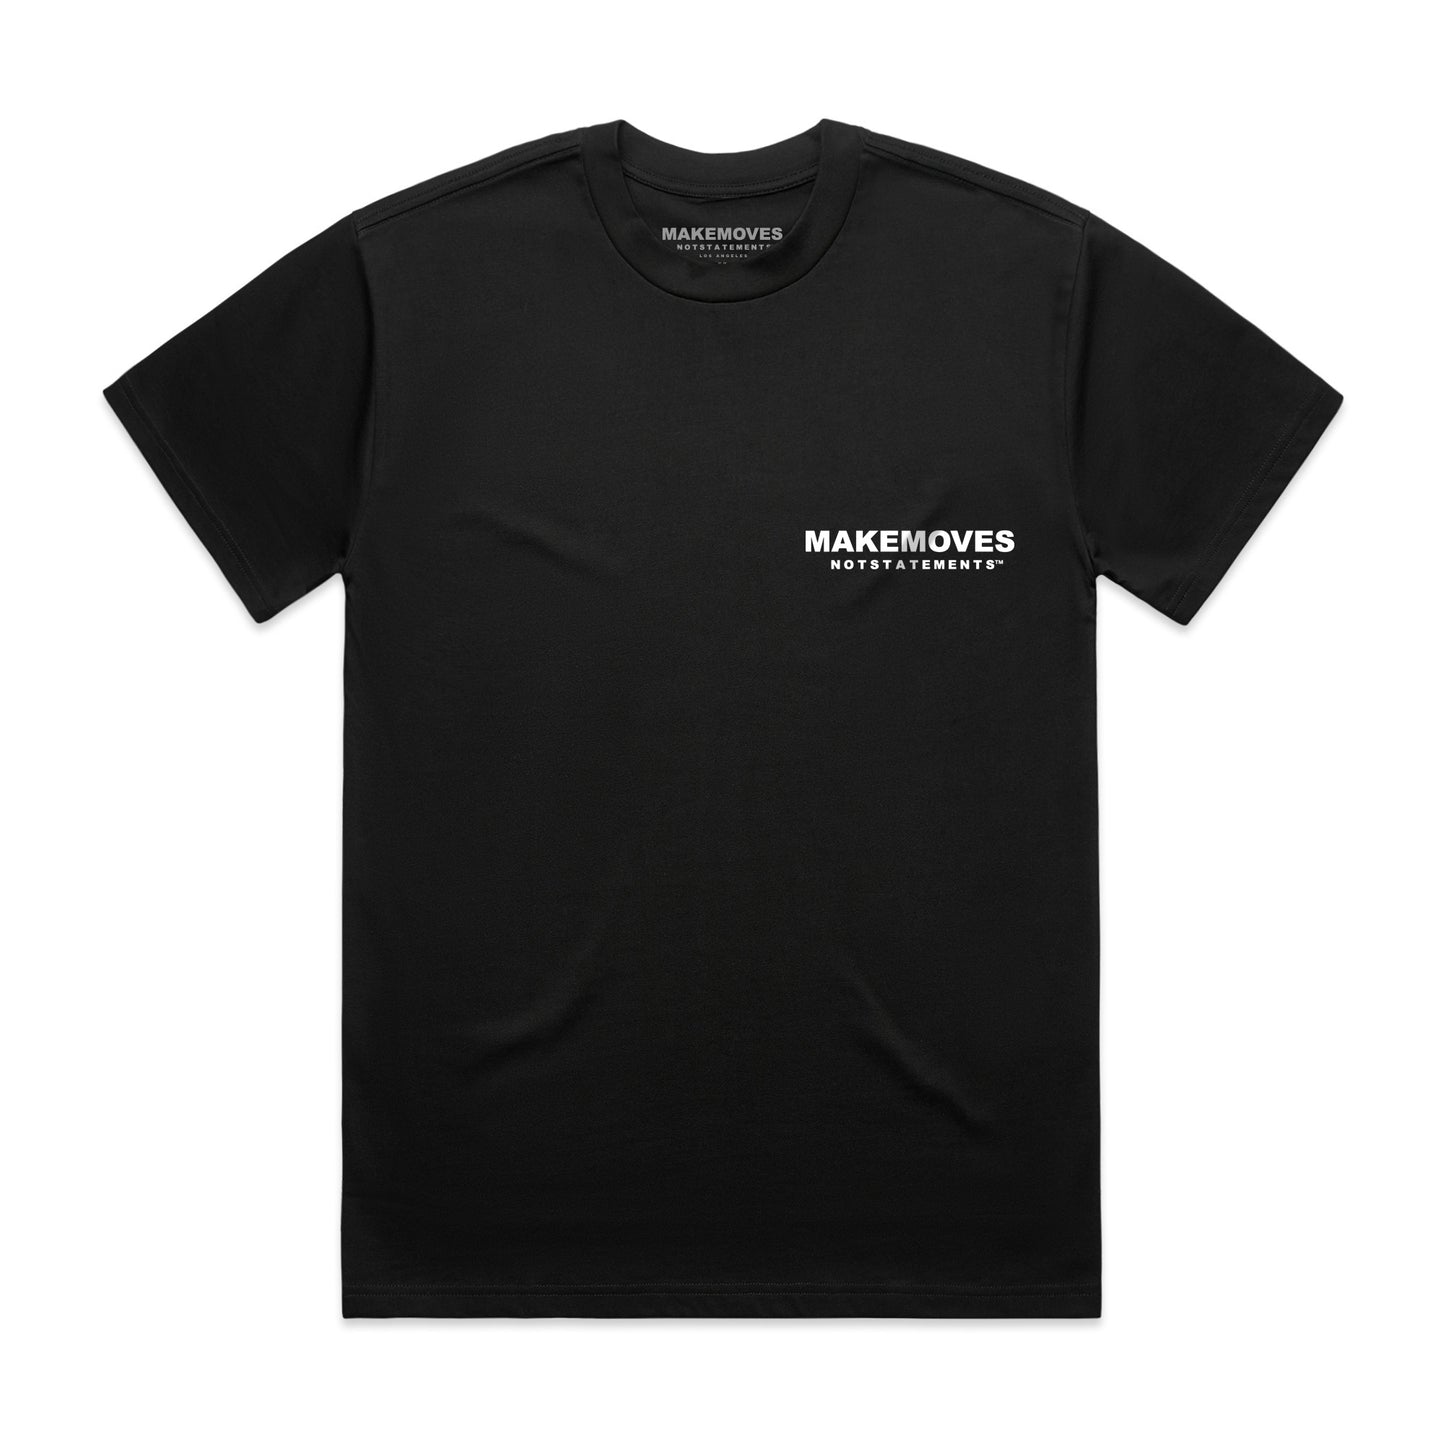 The MMNS Basic Tee in Black is made of 100% USA combed cotton. The Basic Tee features a small MMNS corner logo on the front and a large MMNS logo on the back.